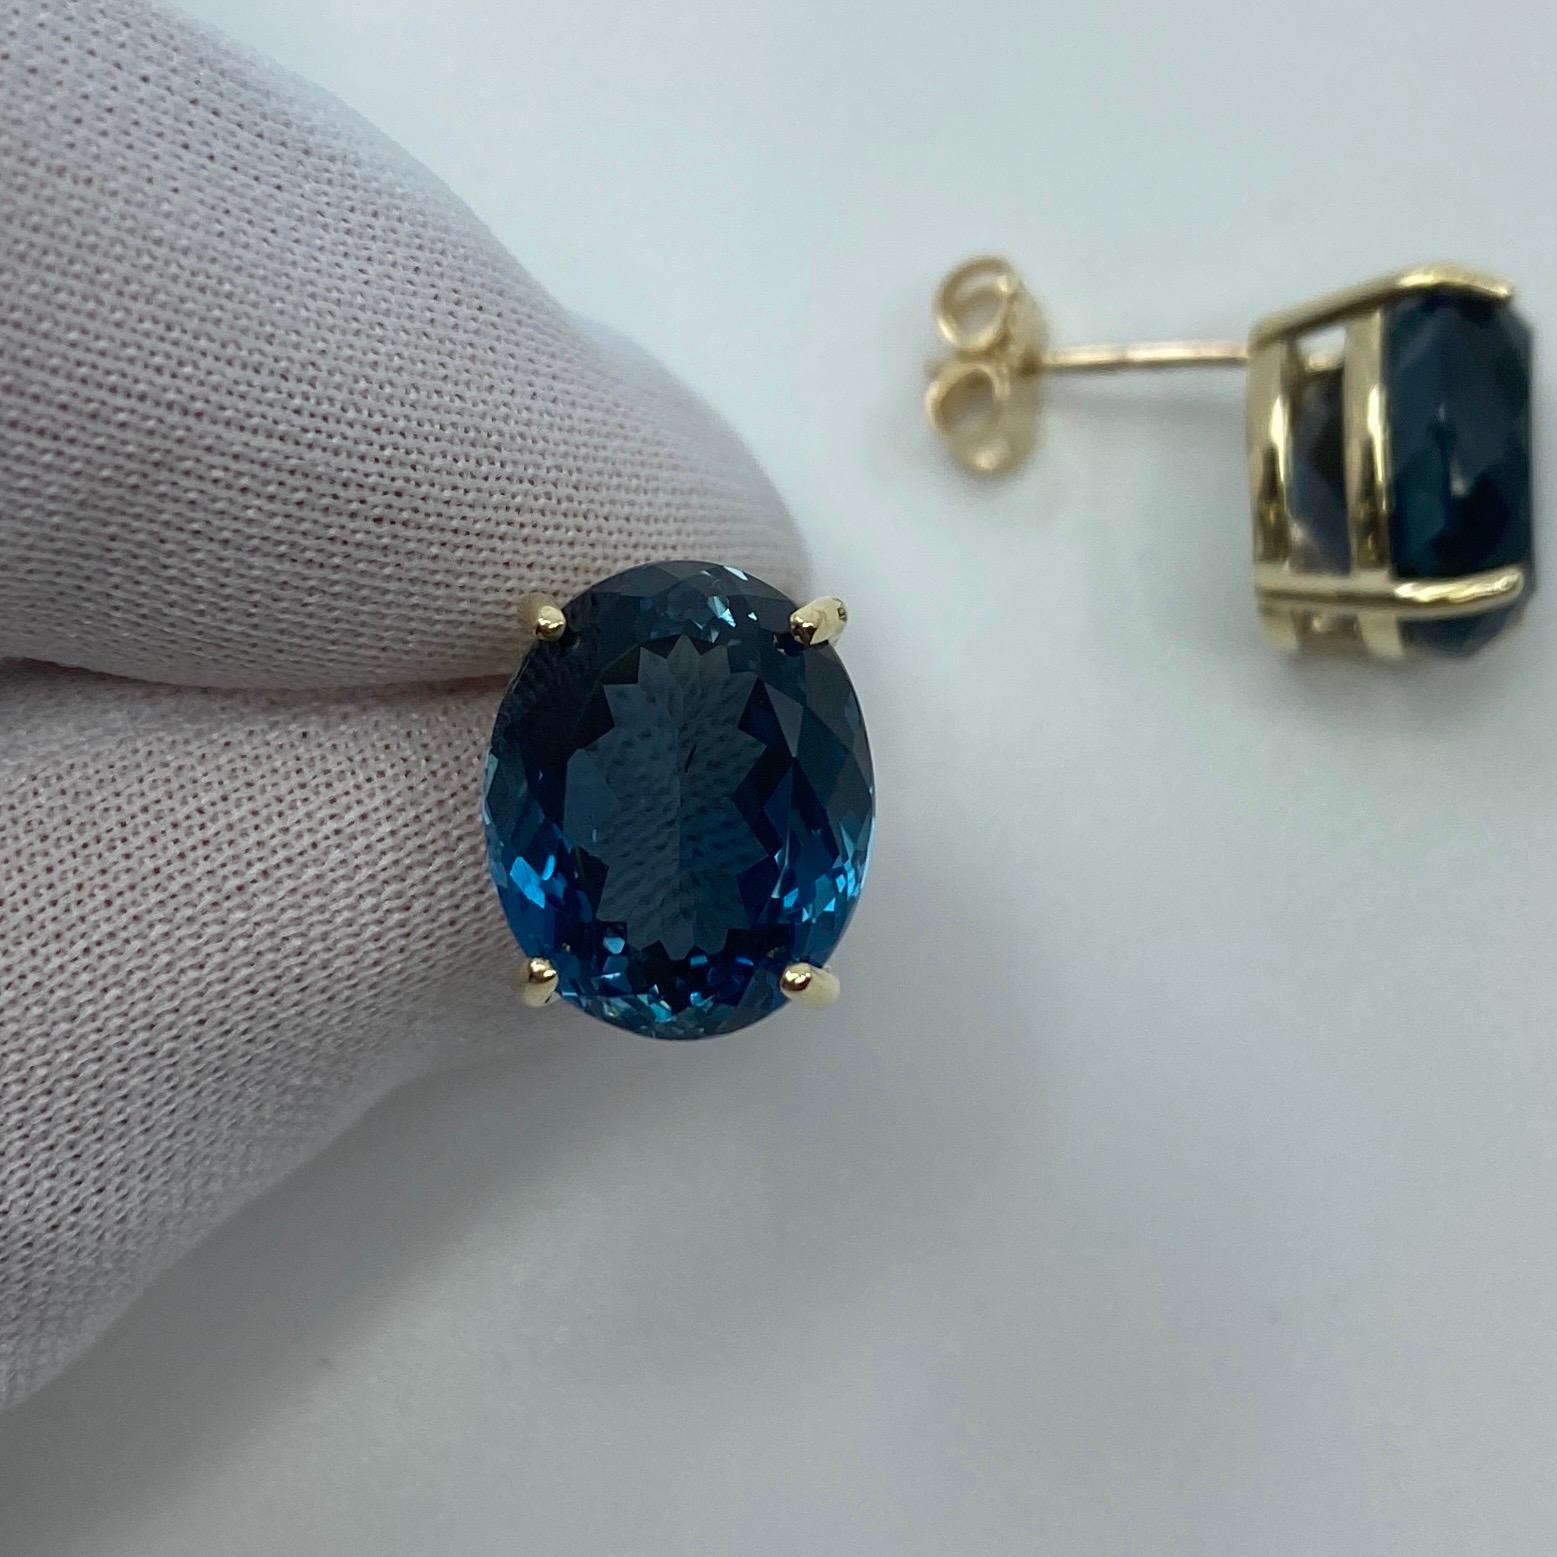 Large 17.53ct Fine London Blue Topaz Oval Cut Yellow Gold Earring Studs For Sale 5